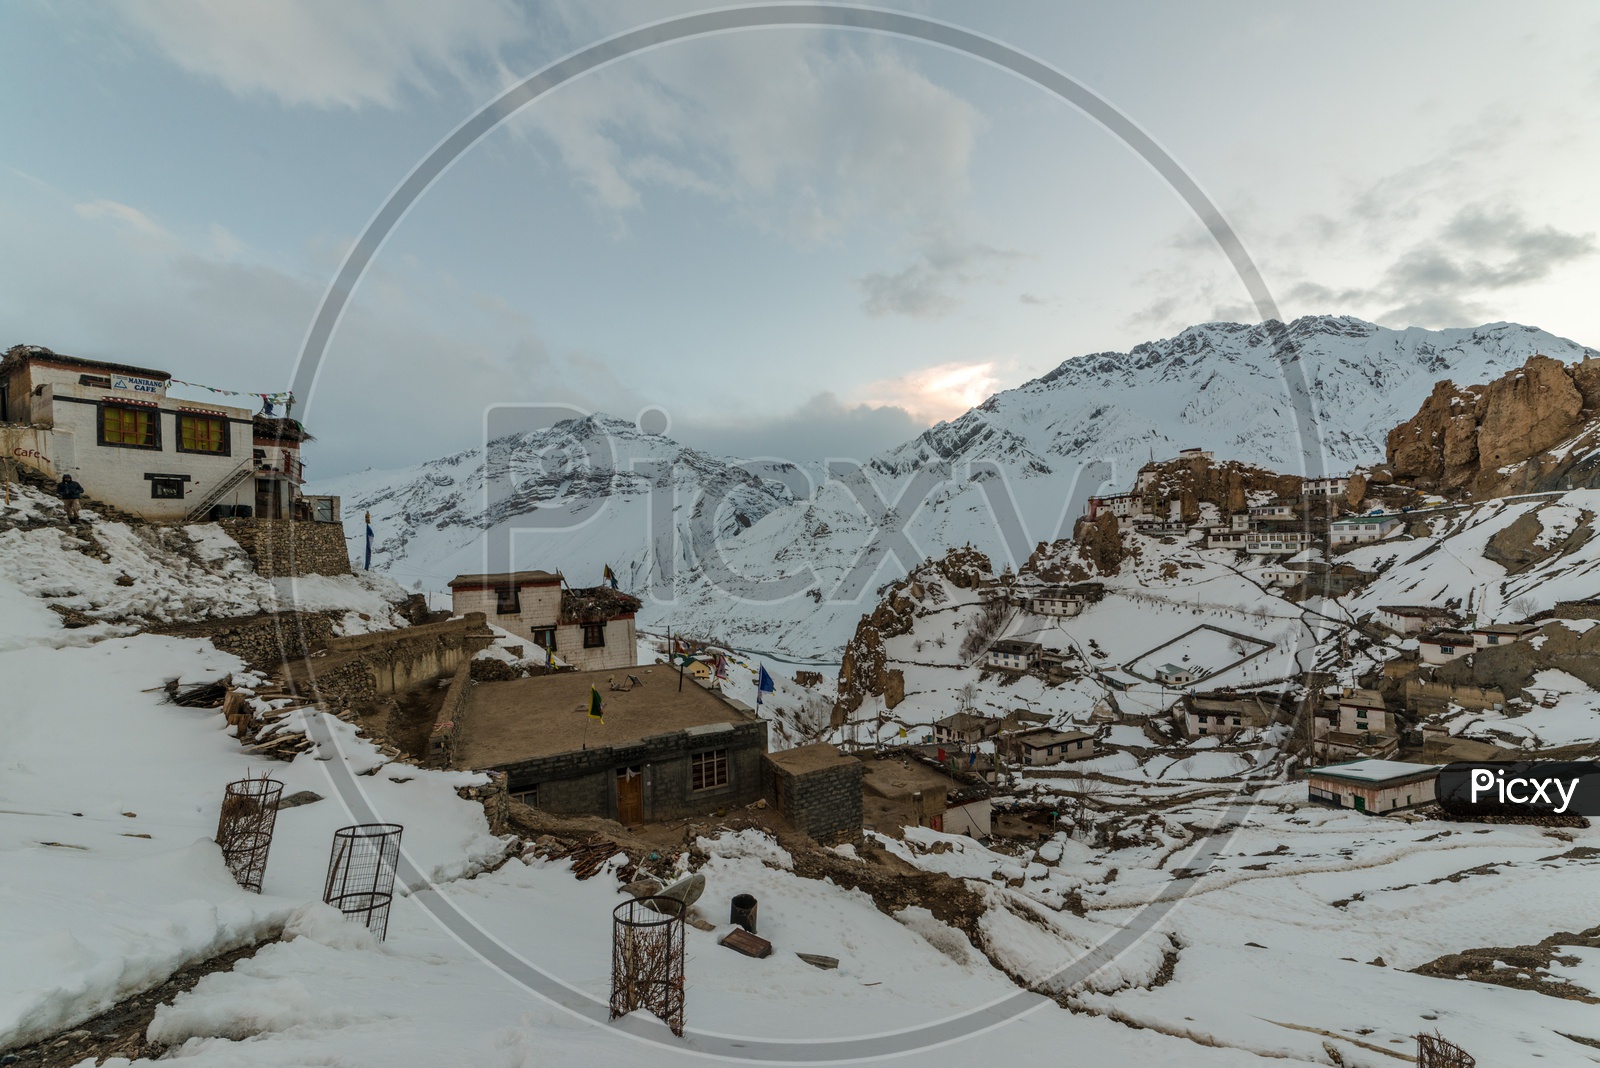 Landscape of Spiti Village Covered in Snow with Surrounded by Snowy Mountains